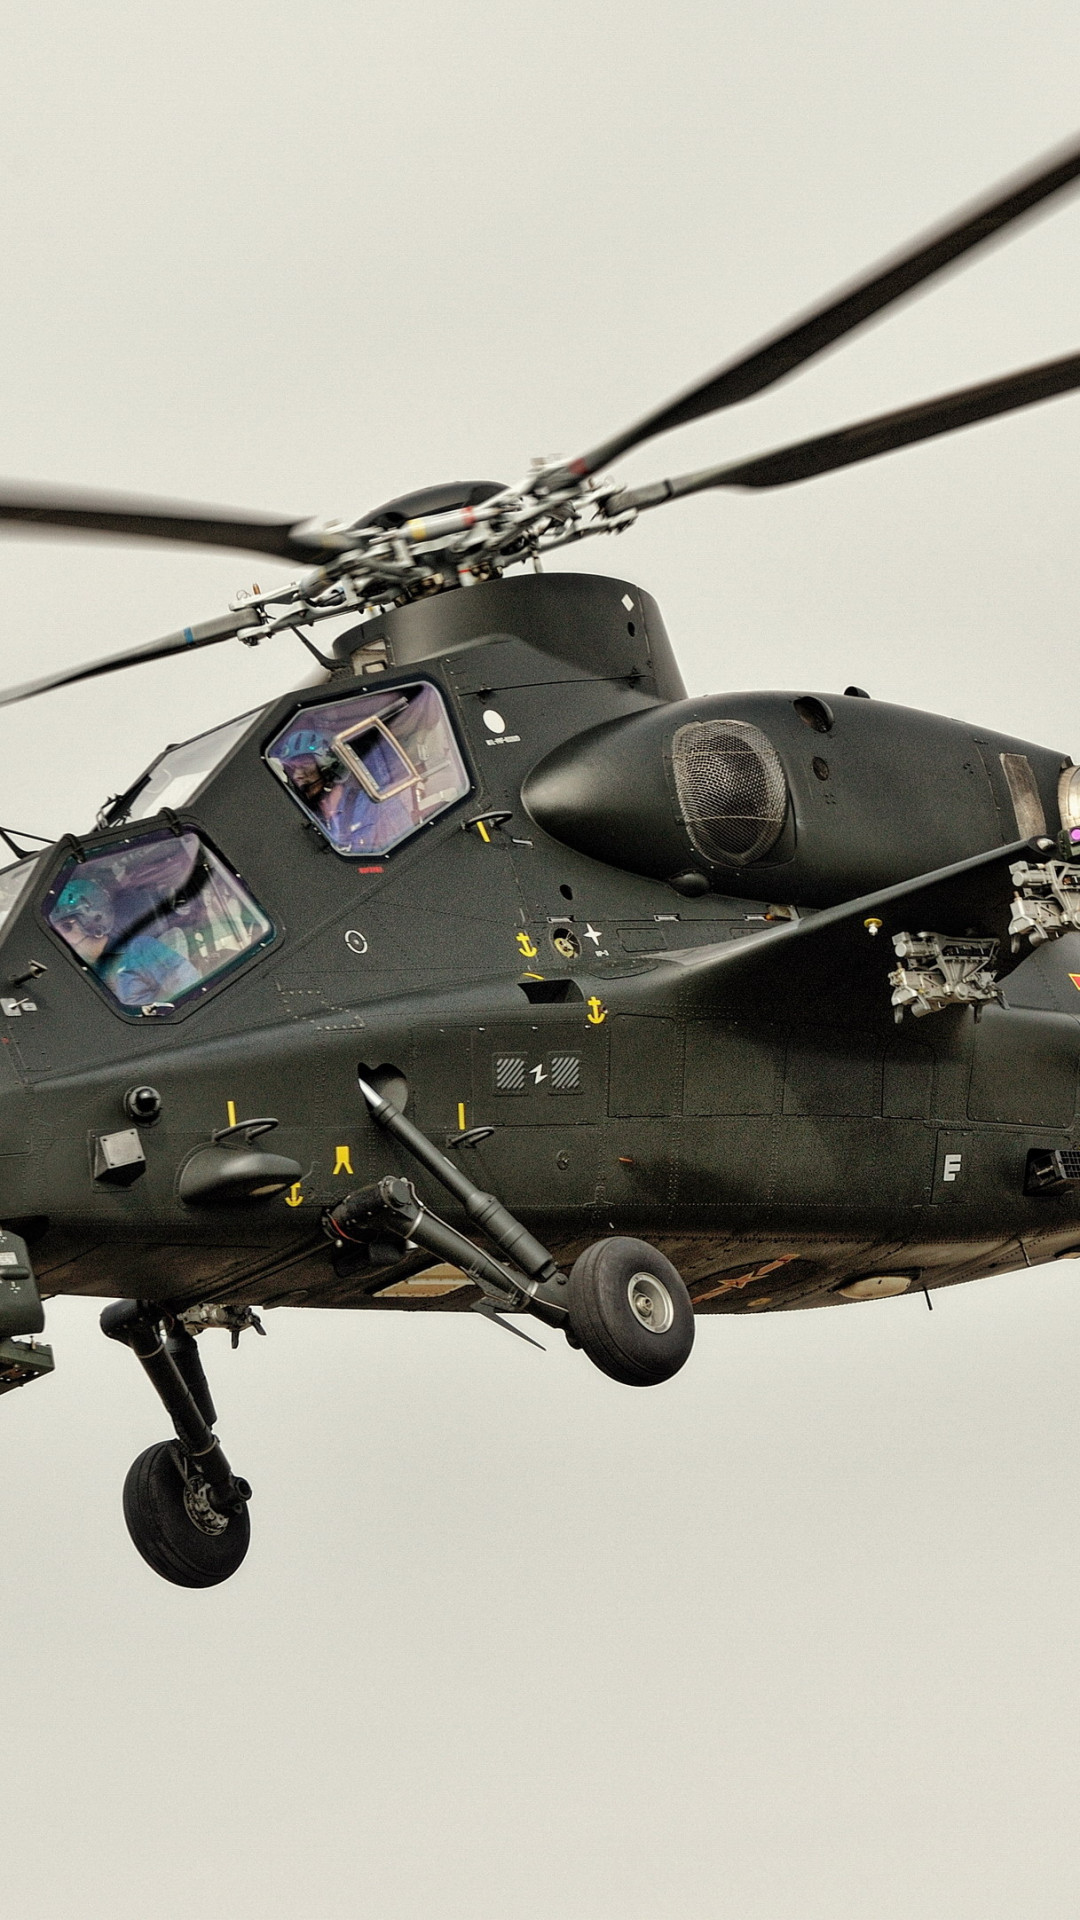 Wallpaper CAIC Z-10, attack helicopter, China Air Force, Military #80461080 x 1920